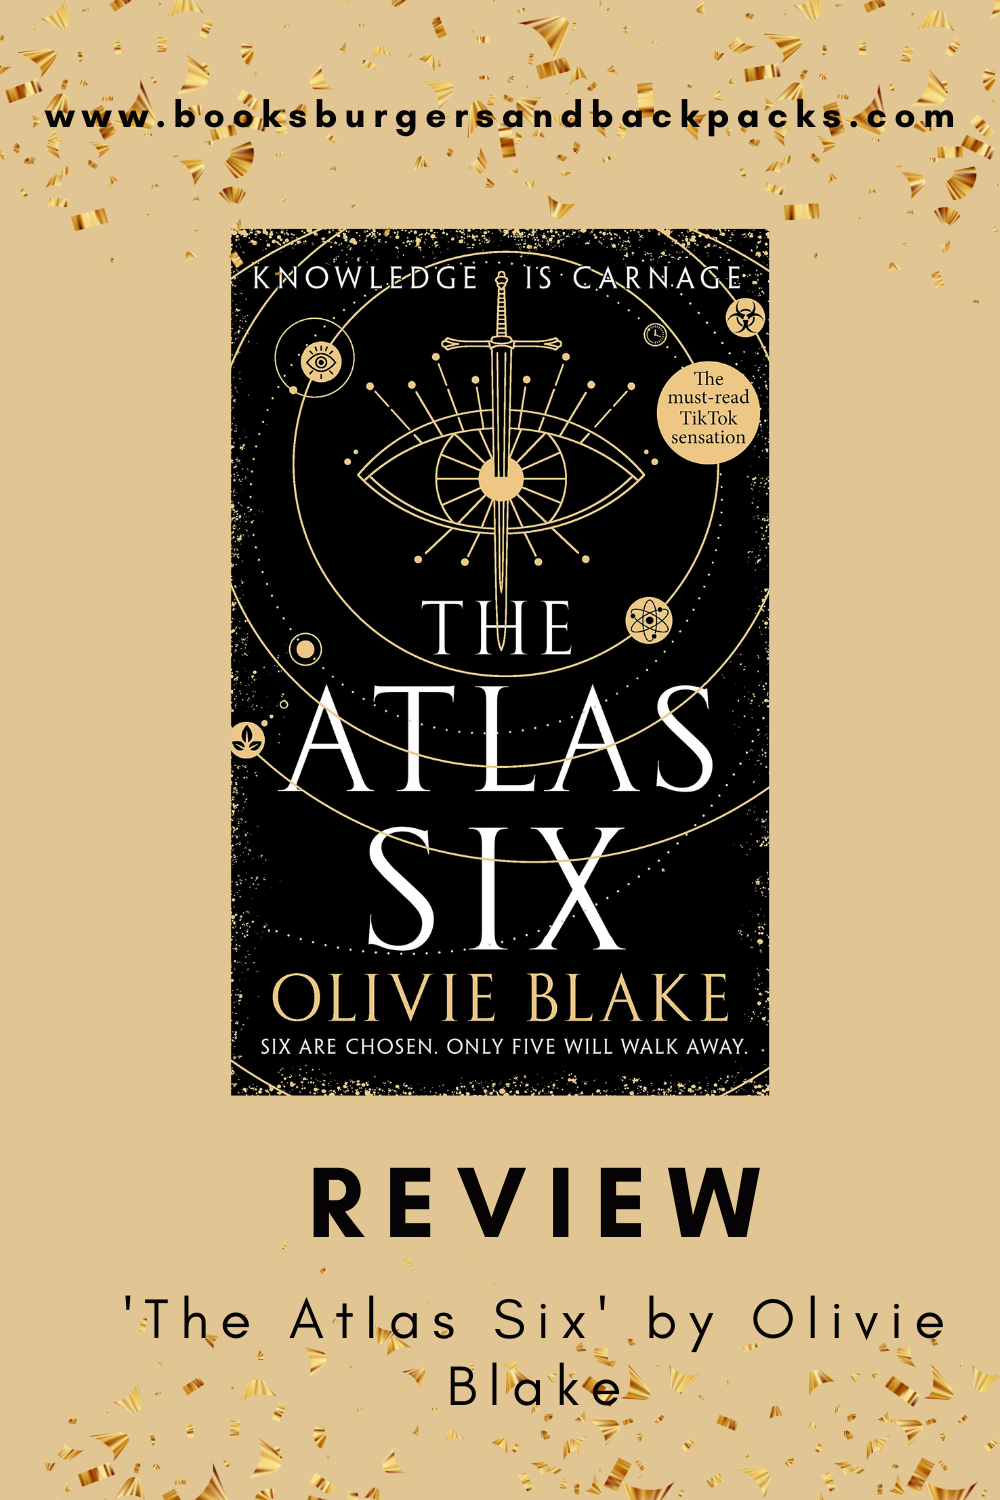 Review: 'The Atlas Six' by Olivie Blake (dark academia fantasy) — Books,  Burgers and Backpacks